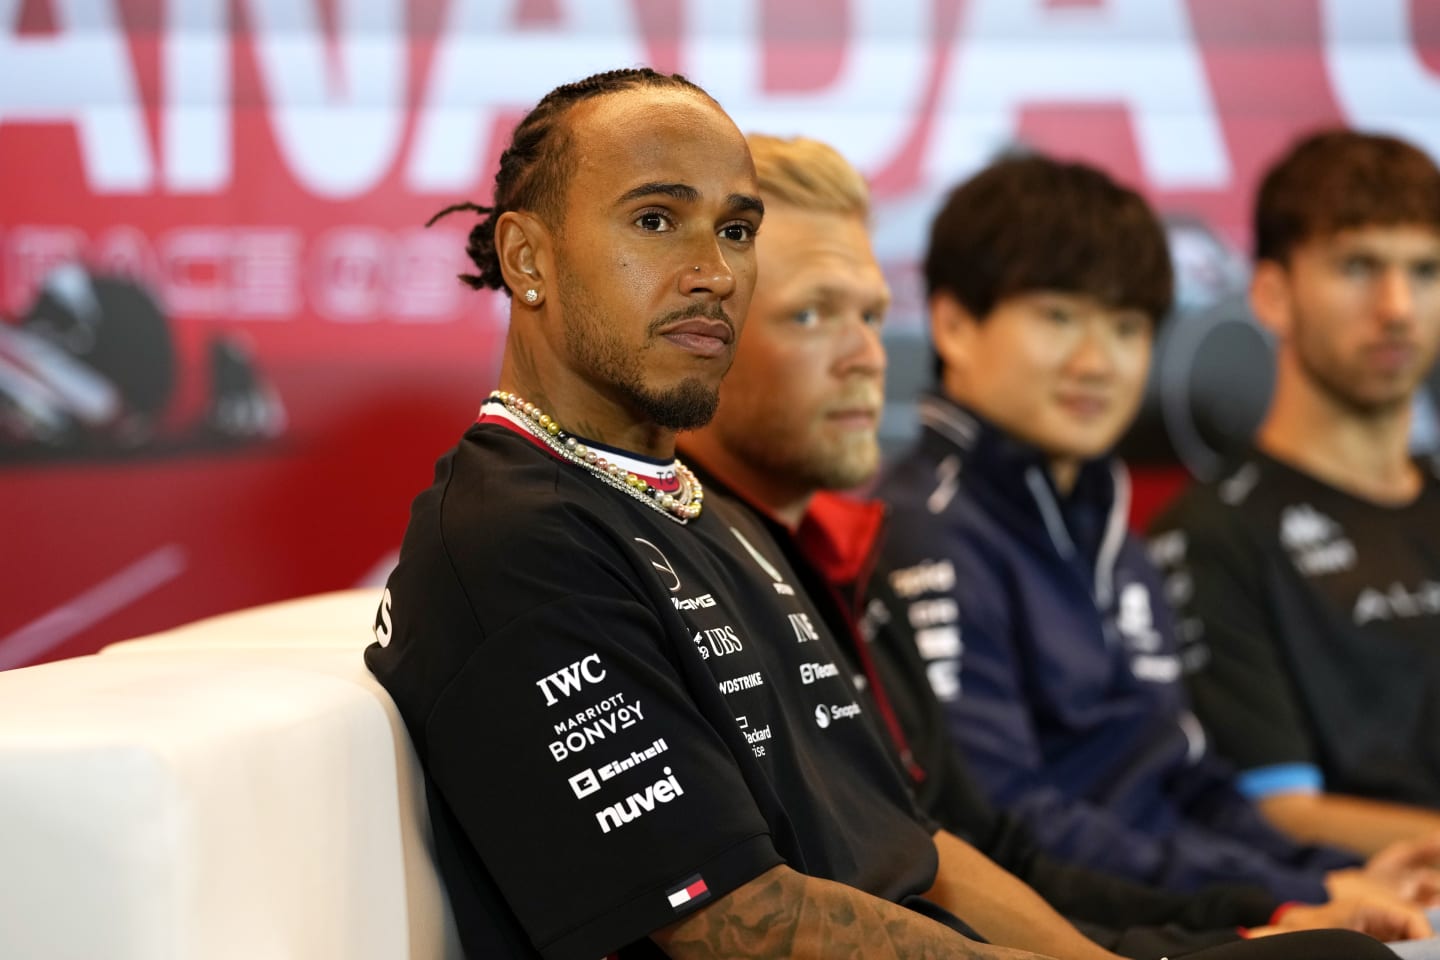 MONTREAL, QUEBEC - JUNE 15: Lewis Hamilton of Great Britain and Mercedes attends the Drivers Press Conference during previews ahead of the F1 Grand Prix of Canada at Circuit Gilles Villeneuve on June 15, 2023 in Montreal, Quebec. (Photo by Rudy Carezzevoli/Getty Images)